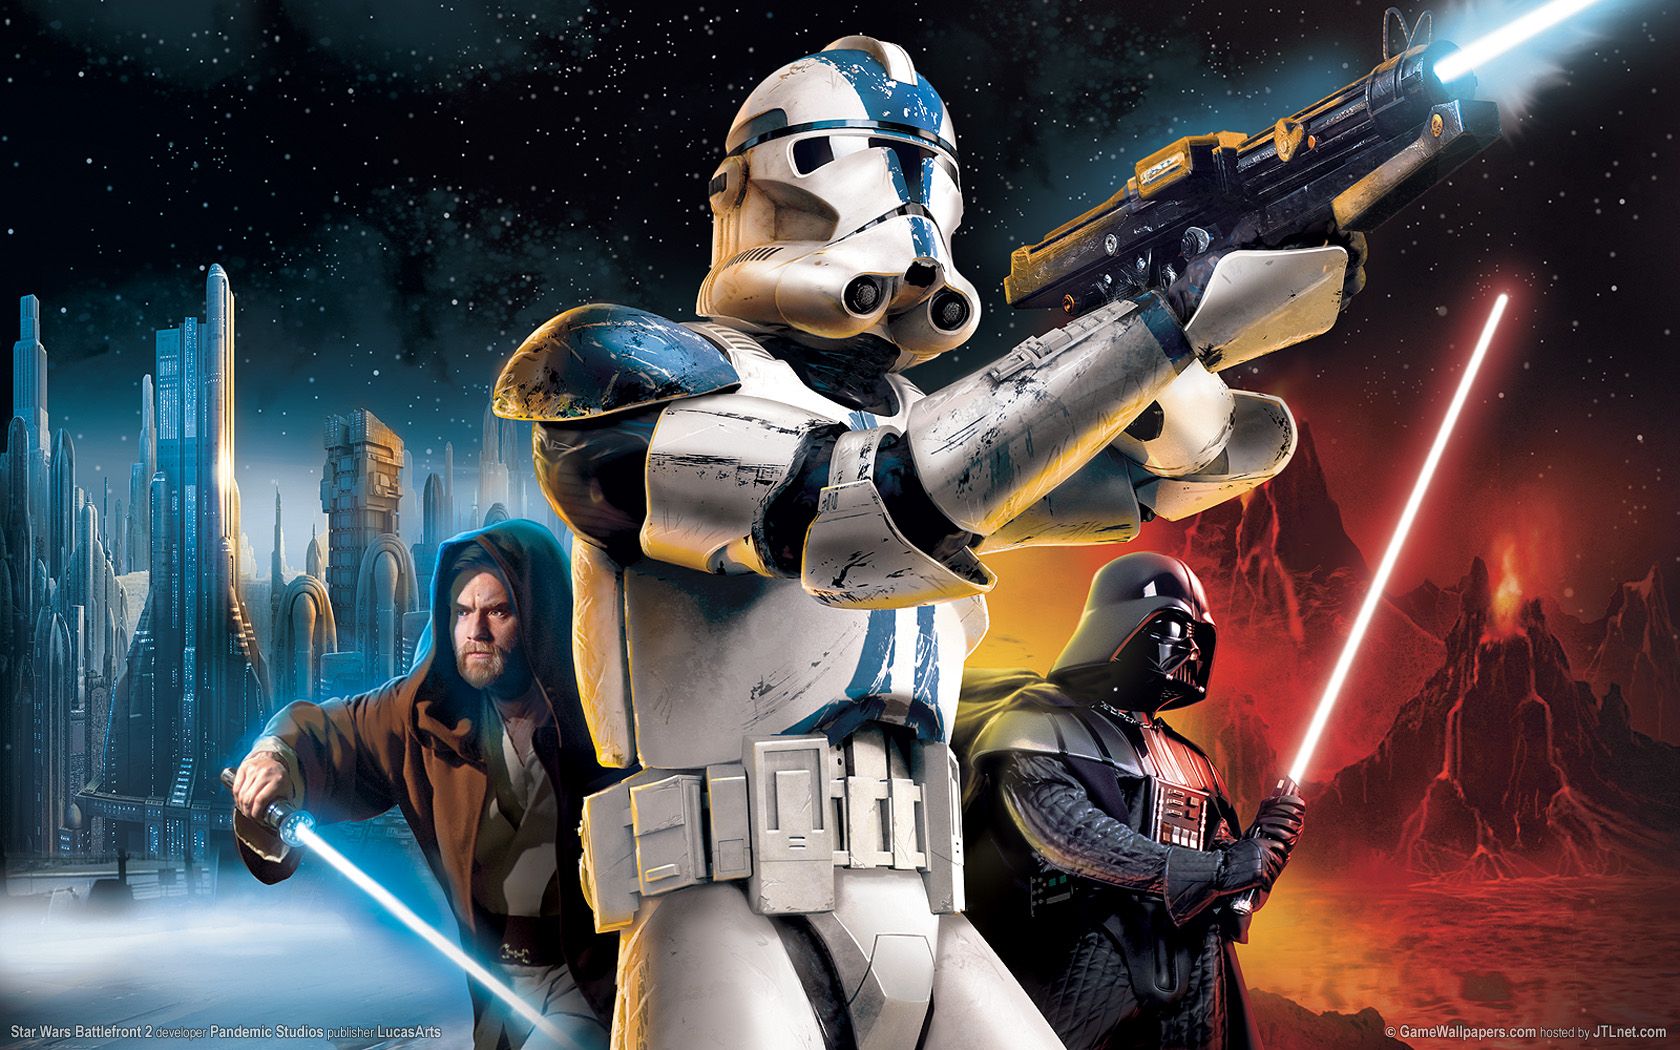 All the Star Wars May the 4th Gaming Deals